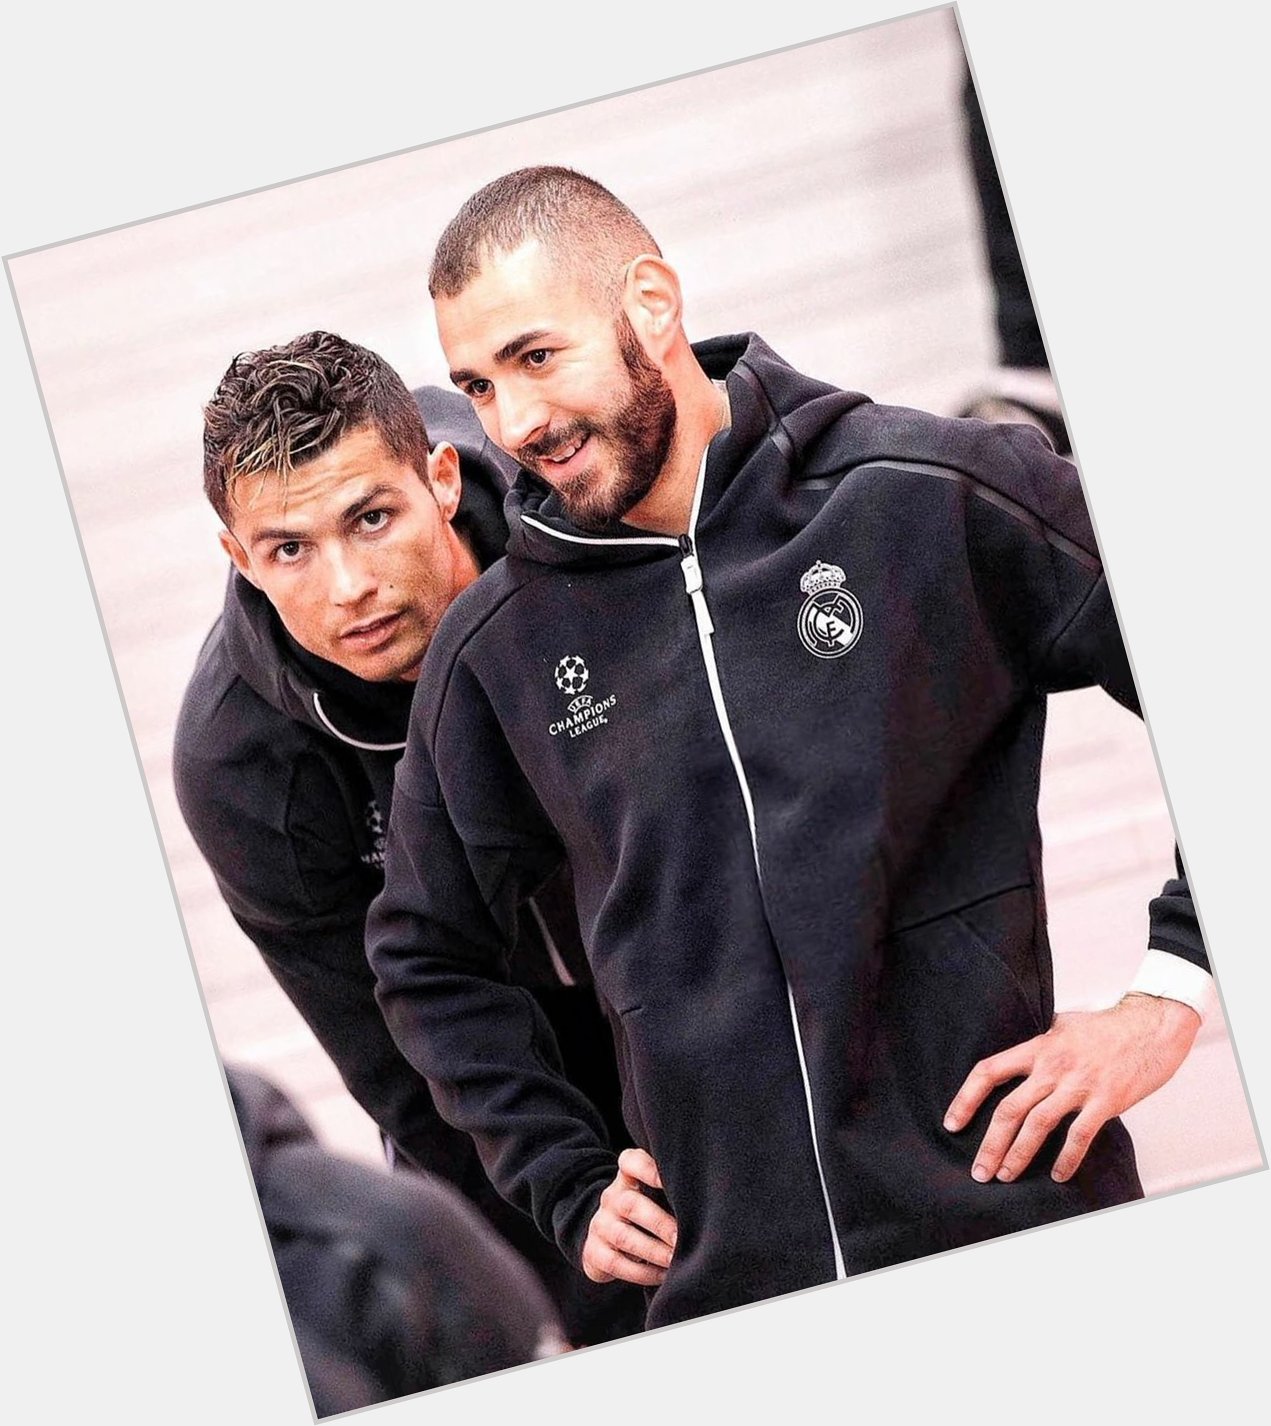 One of the best players of our generation and a world class footballer.

Happy Birthday, Karim Benzema.   